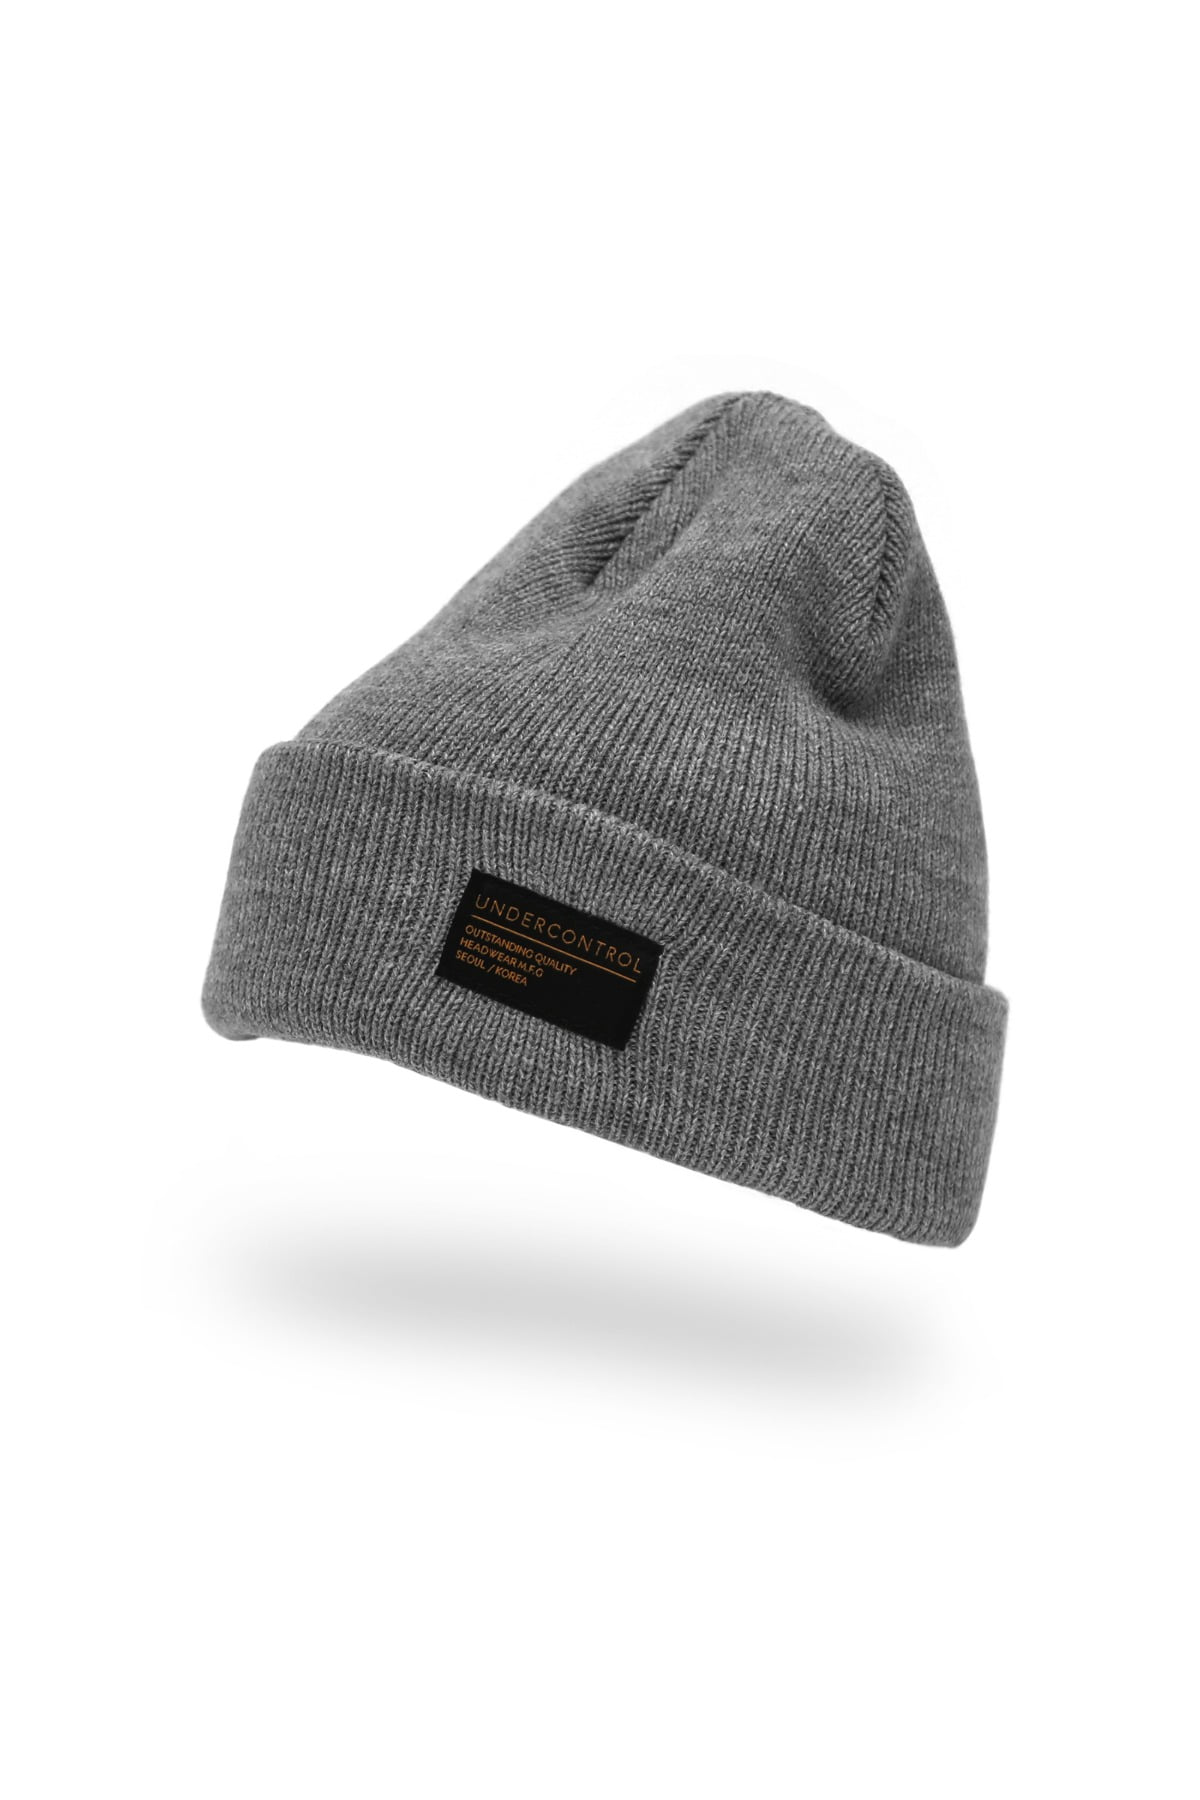 BEANIE / LOOSE FIT / AC / LIGHT GREY (BOX PACKAGE)